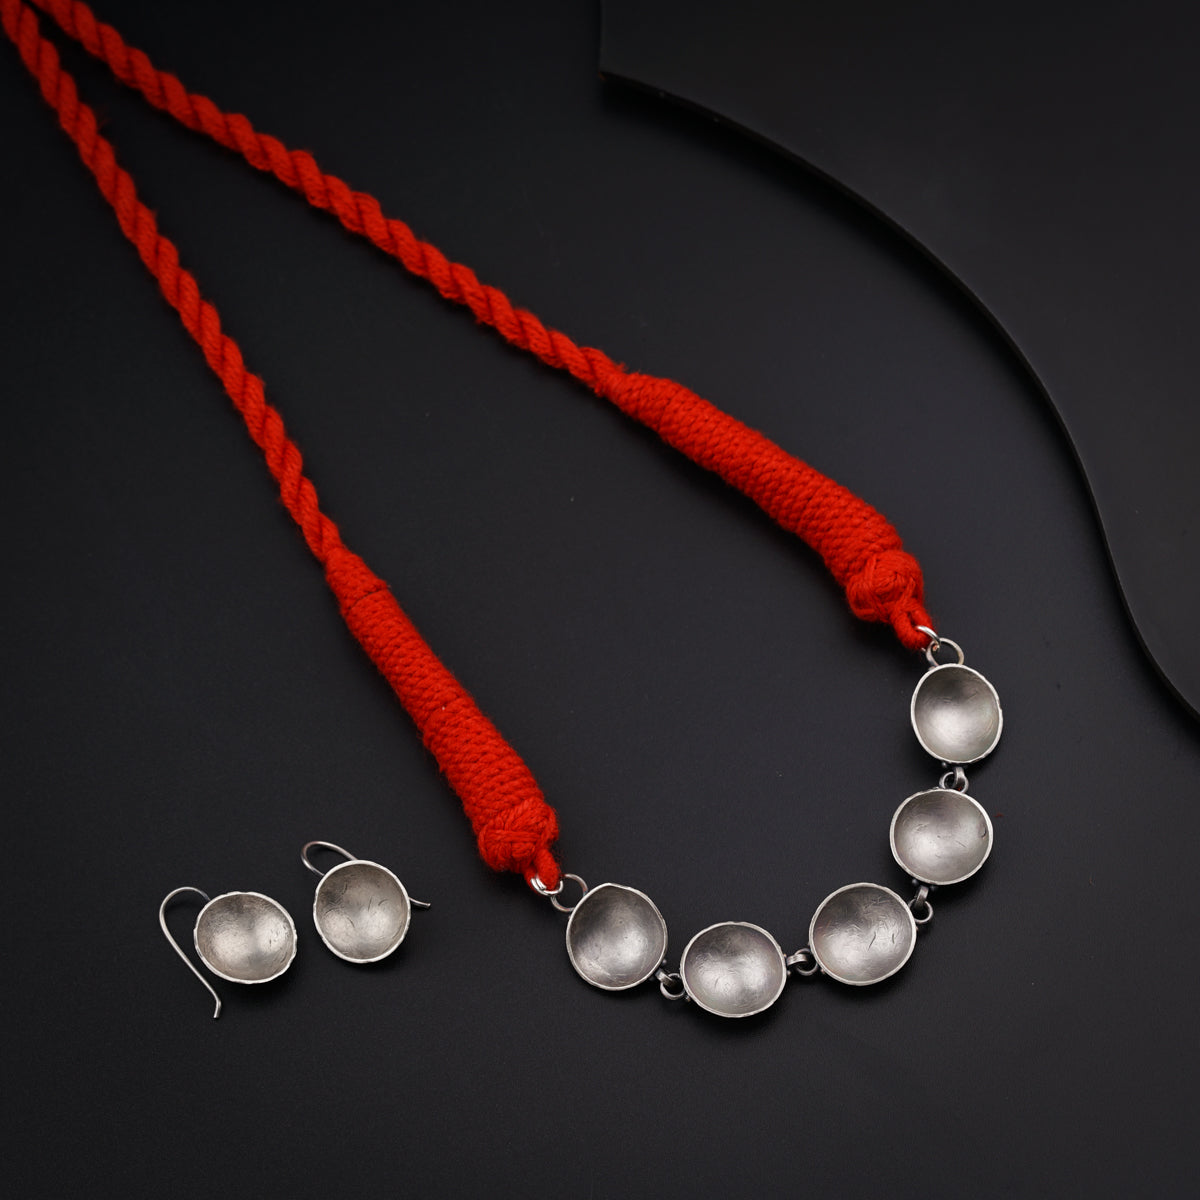 a necklace and earring with a red cord on a black surface